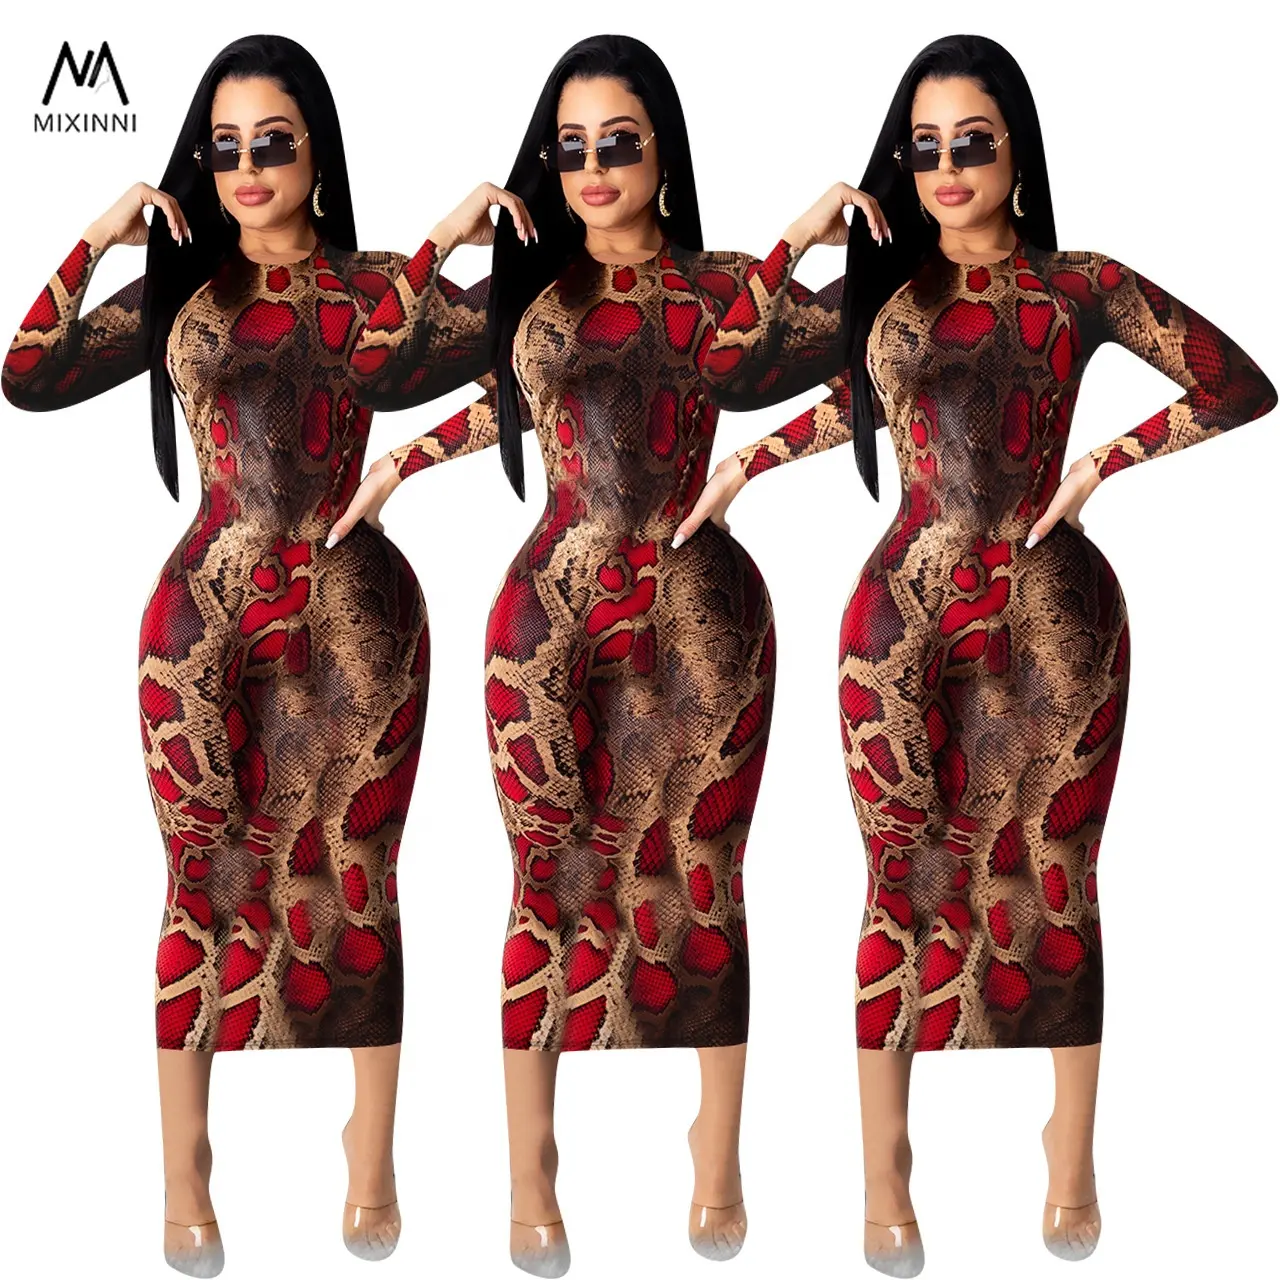 MXN 058 European and American women's sexy tight casual dress,long sleeve printed dress for women,long party dresses women dress